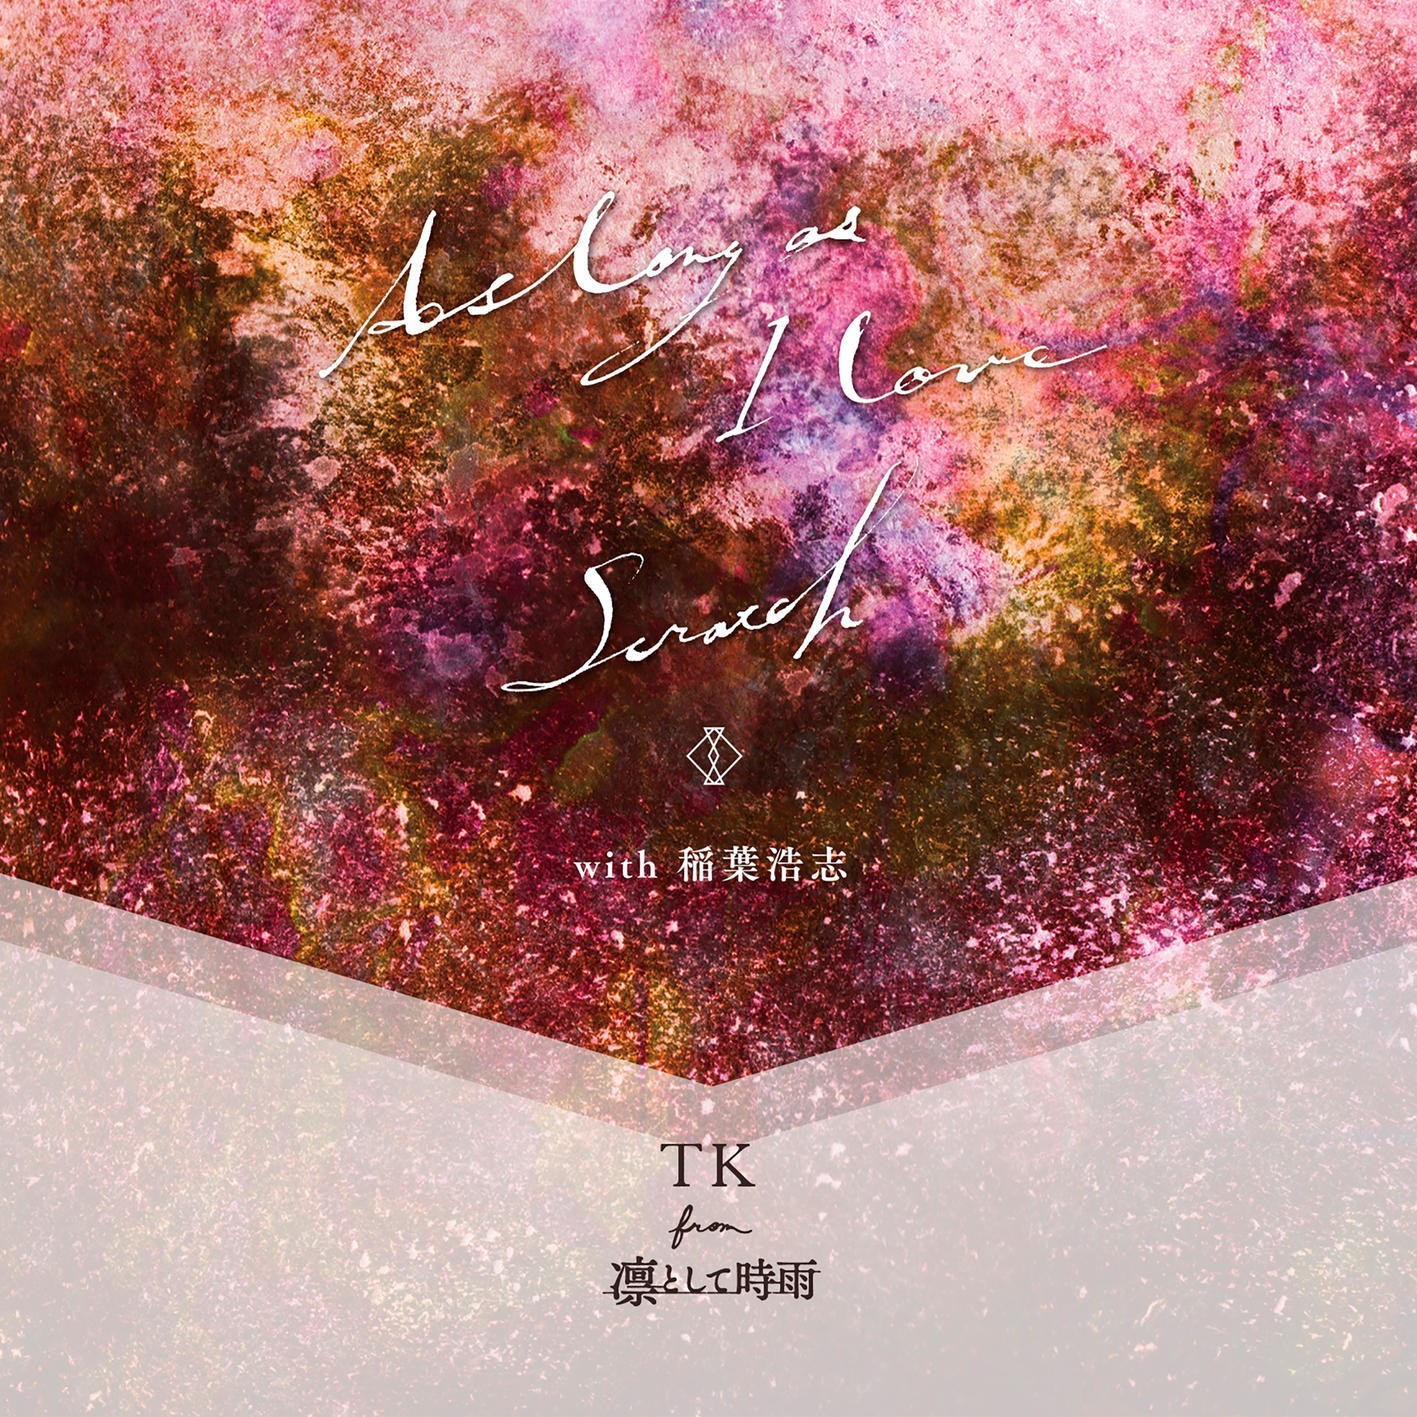 [Single] TK from 凛として時雨 – As long as I love / Scratch (with 稲葉浩志) [FLAC / 24bit Lossless / WEB] [2022.03.16]